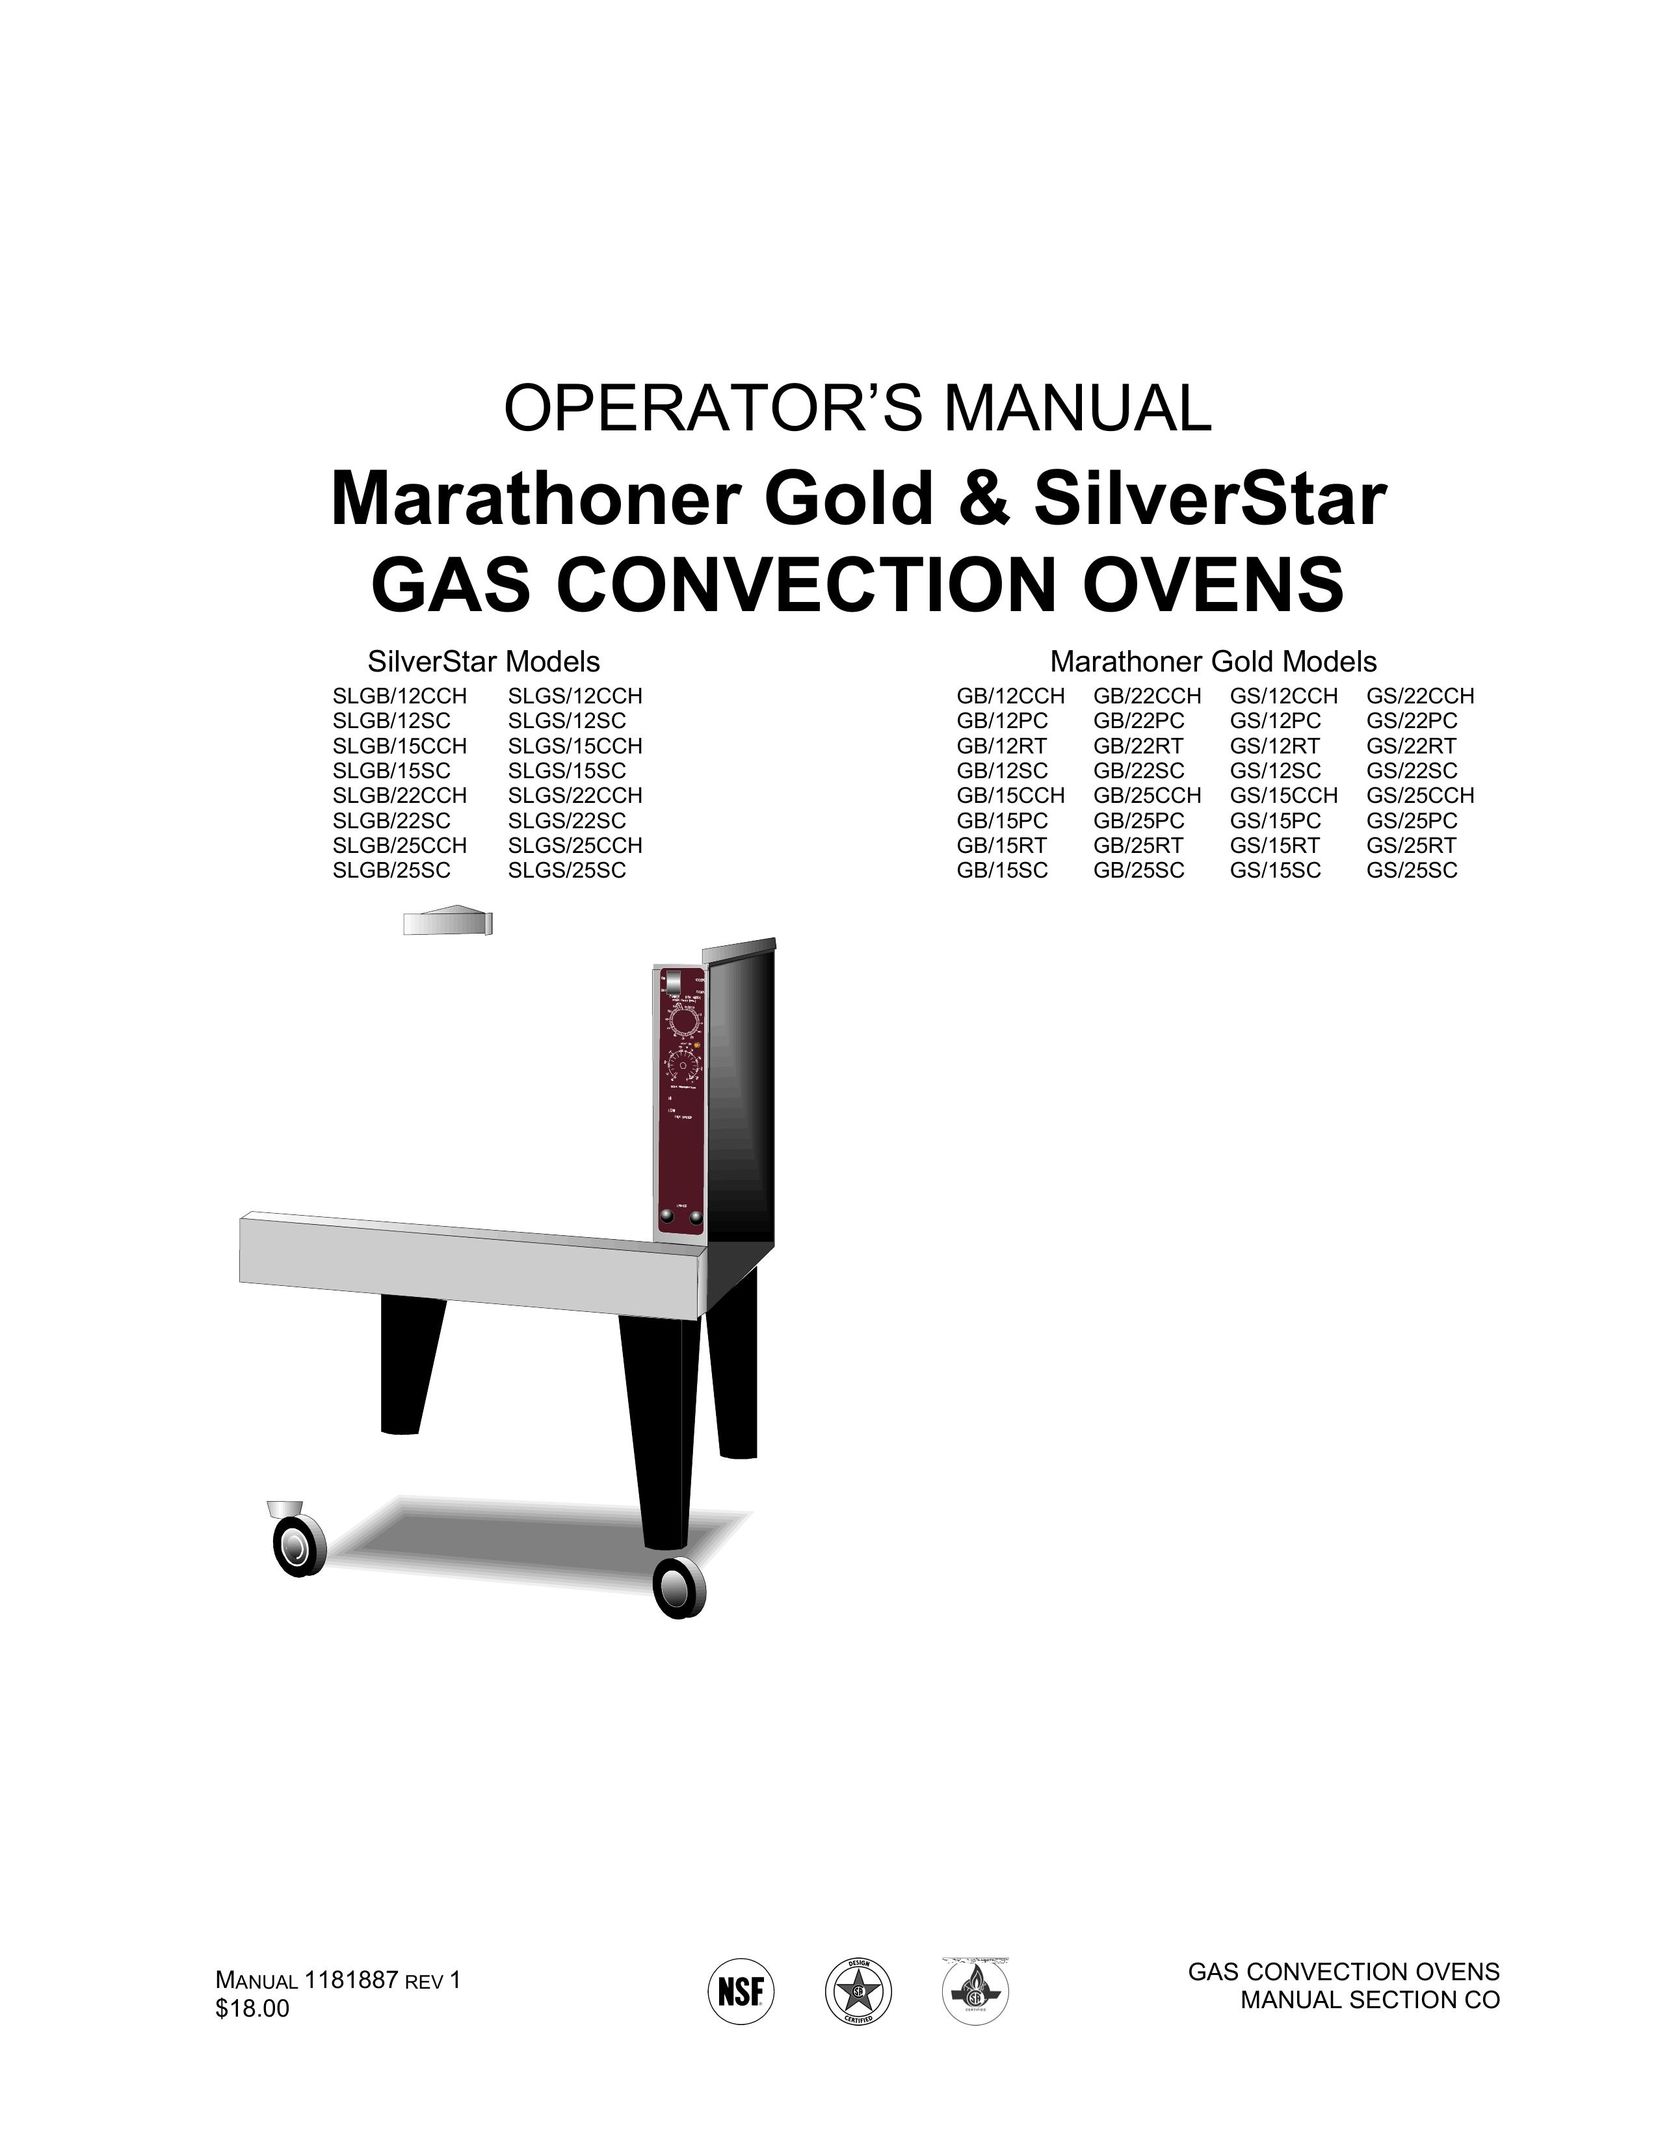 Southbend SLGB/15CCH Oven User Manual